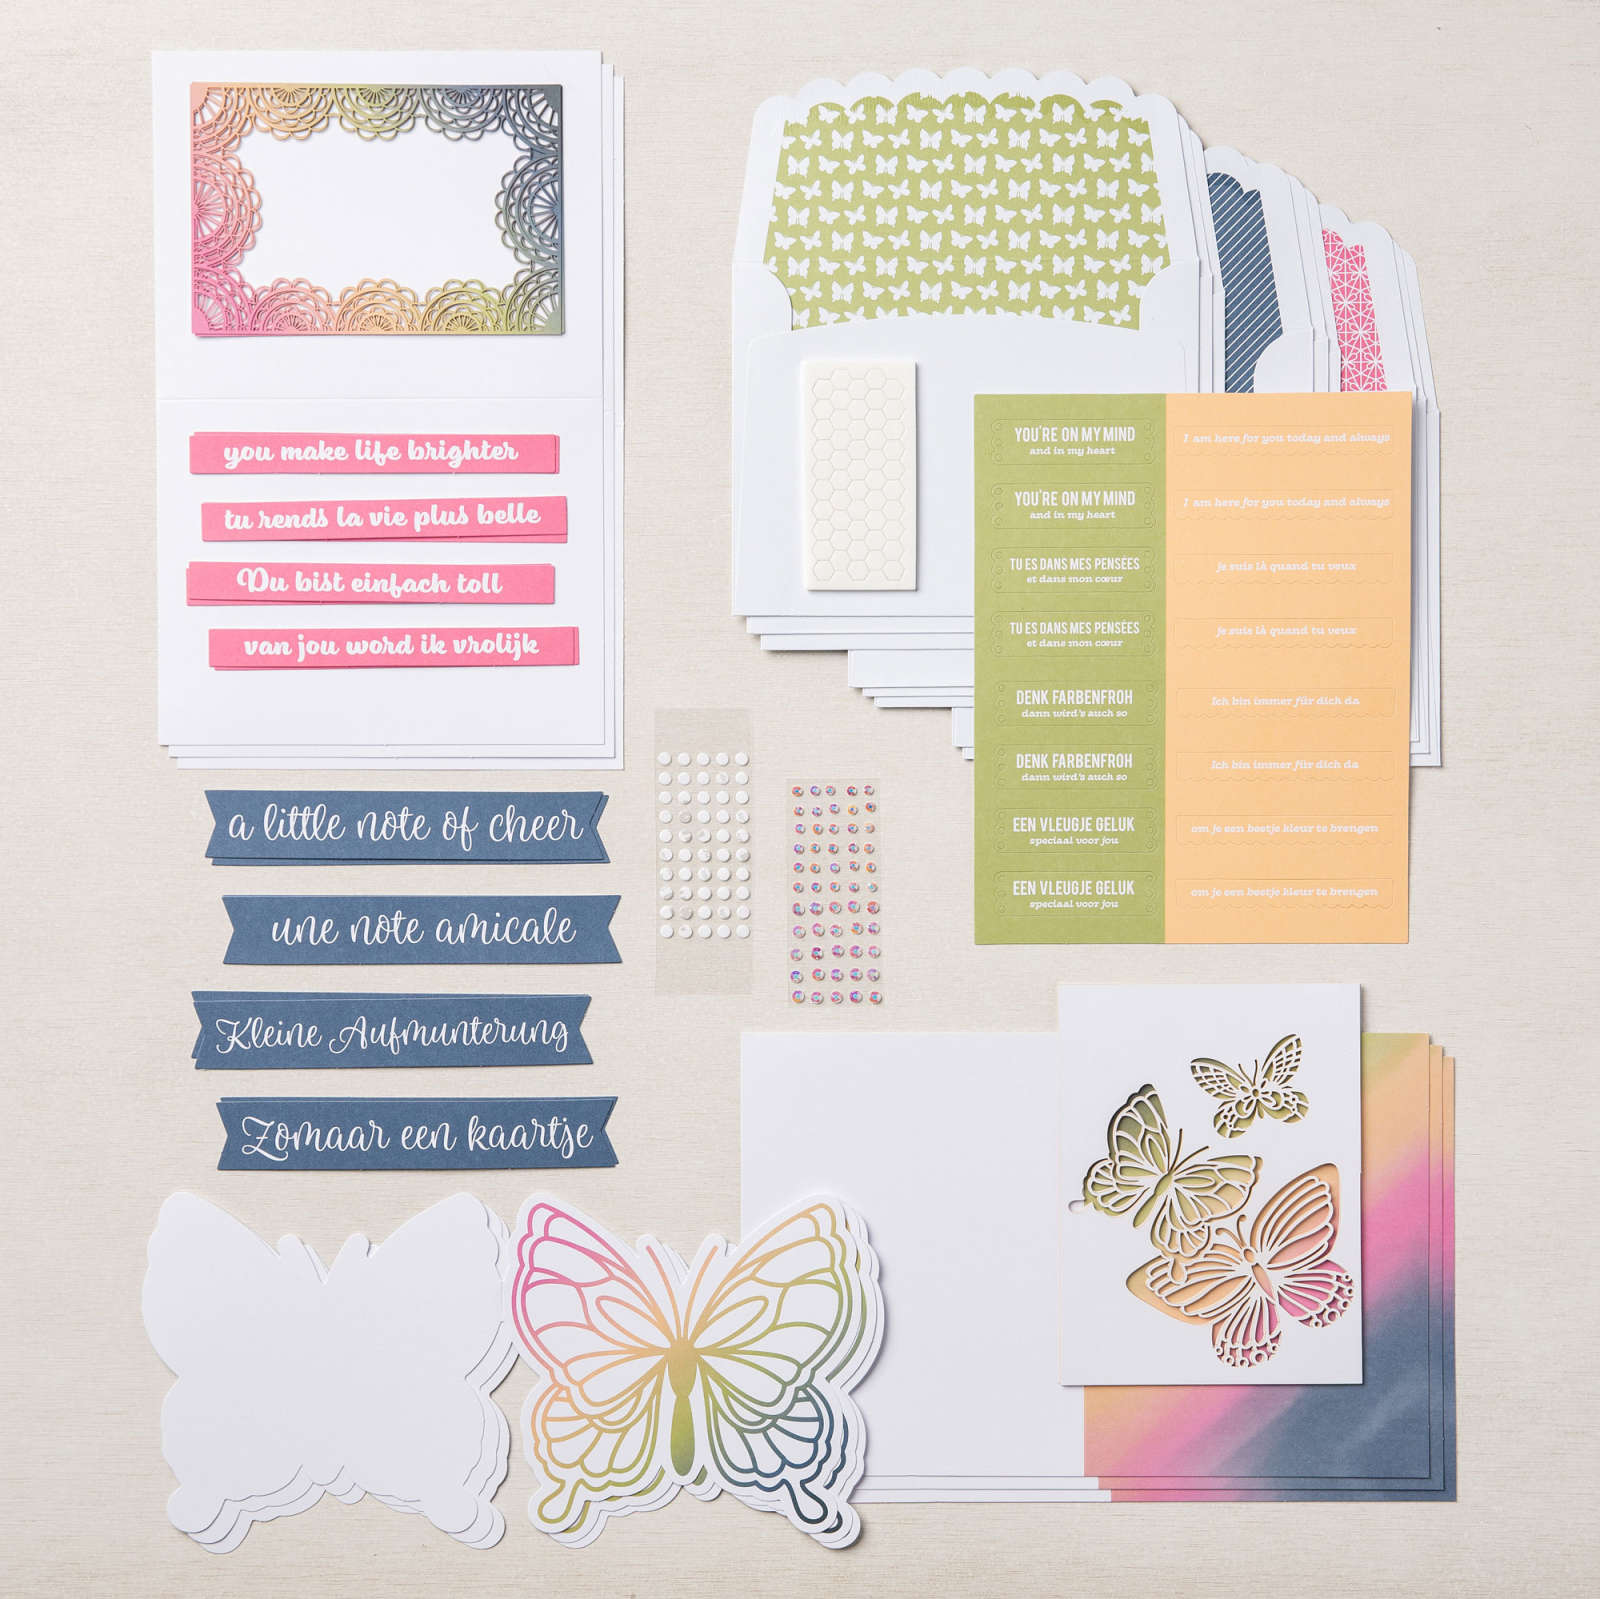 Birthday Card Organizer All-Inclusive Kit by Stampin' Up!